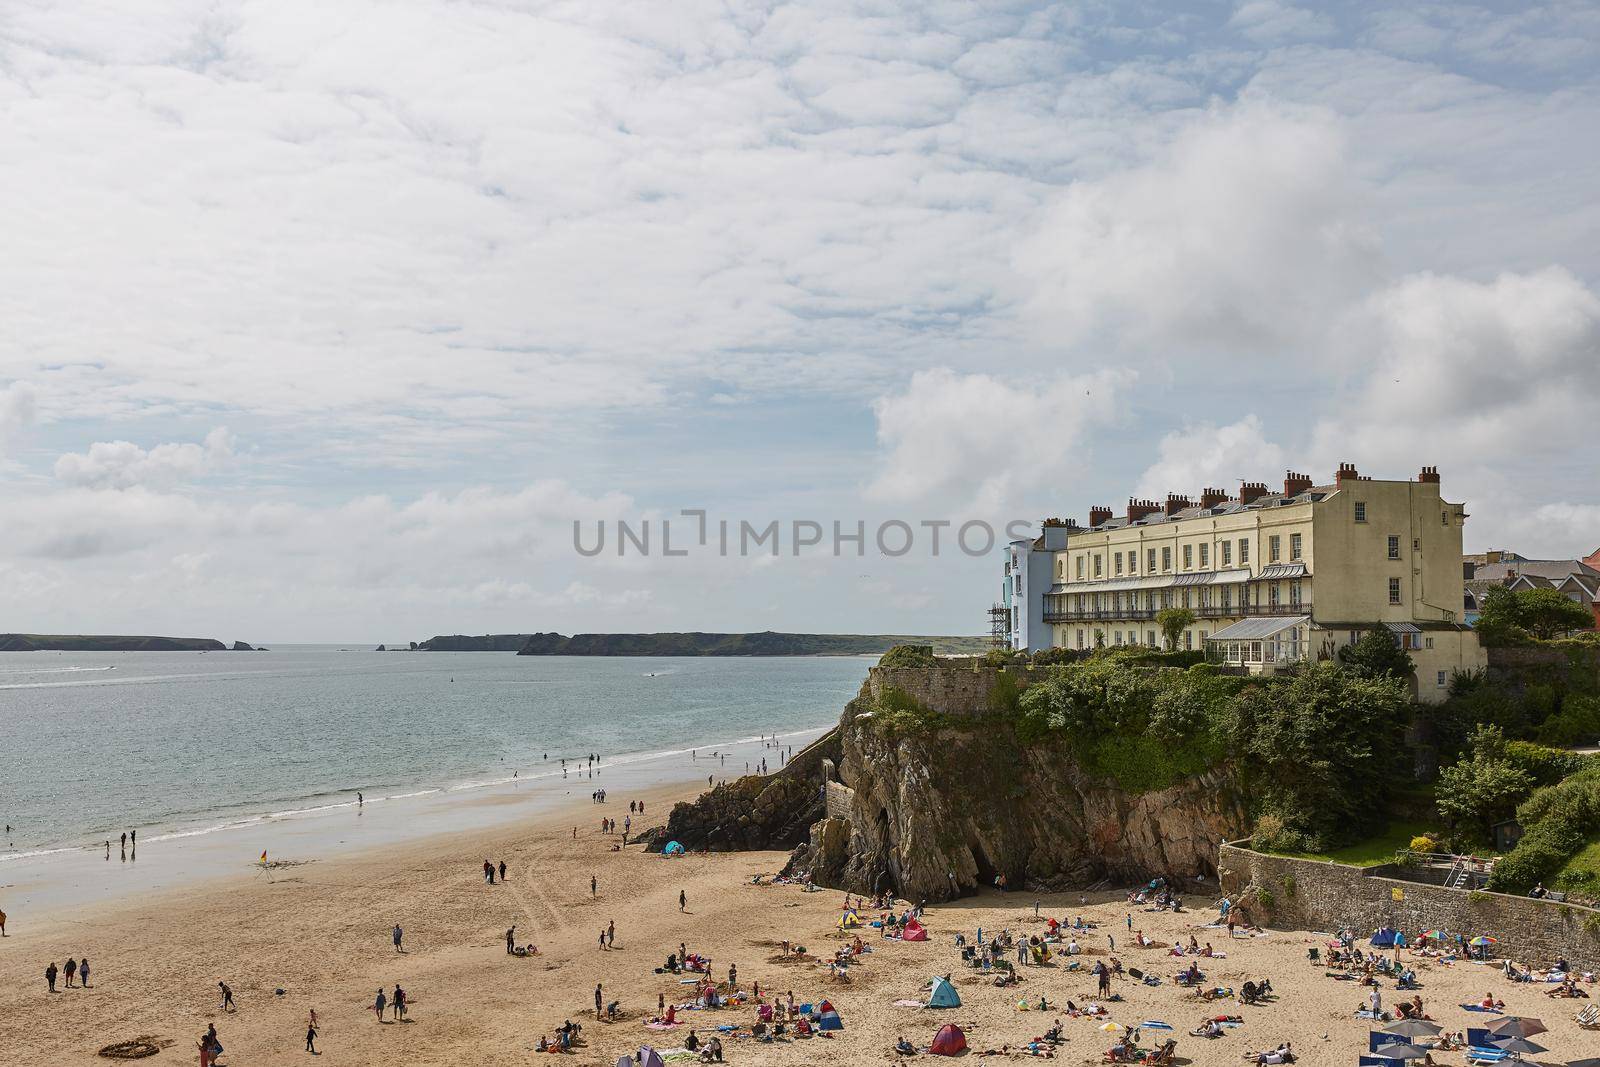 TENBY, WALES, UK - AUGUST 13, 2017: People enjoying the harbour and Castle at Tenby, an ancient walled town; now a tourist destination in the county of Pembrokeshire, south Wales, UK.